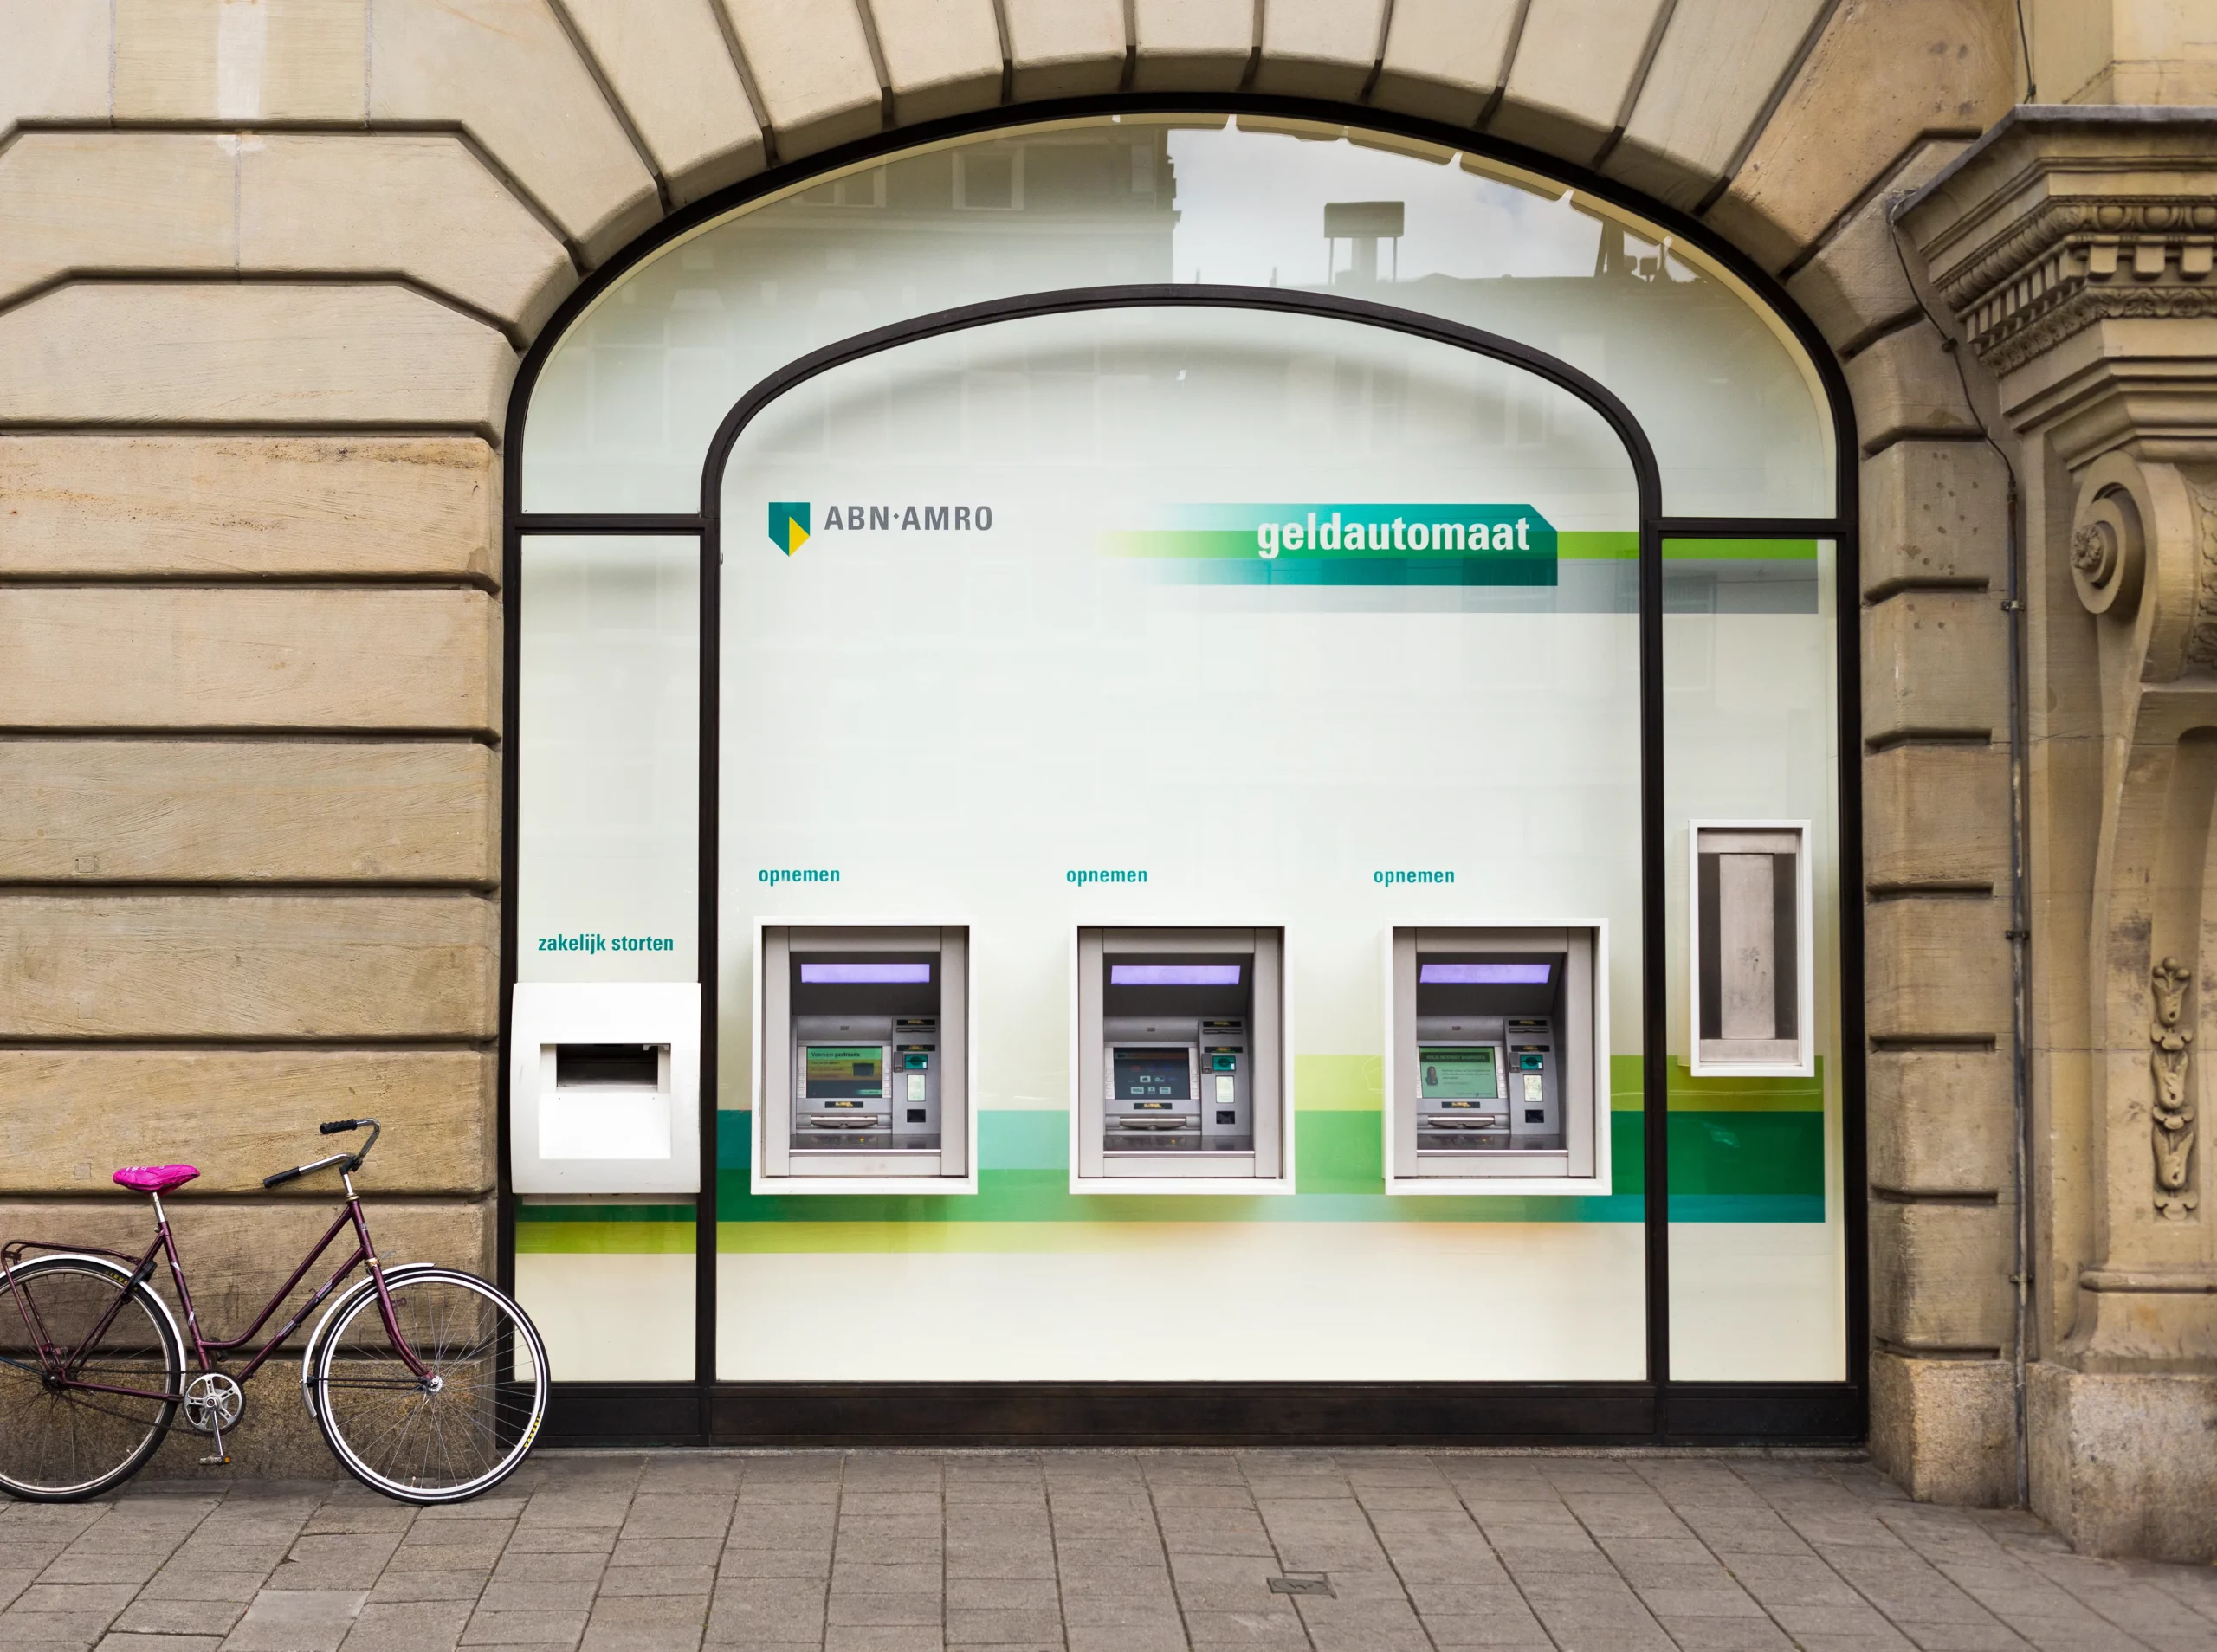 atms in amsterdam